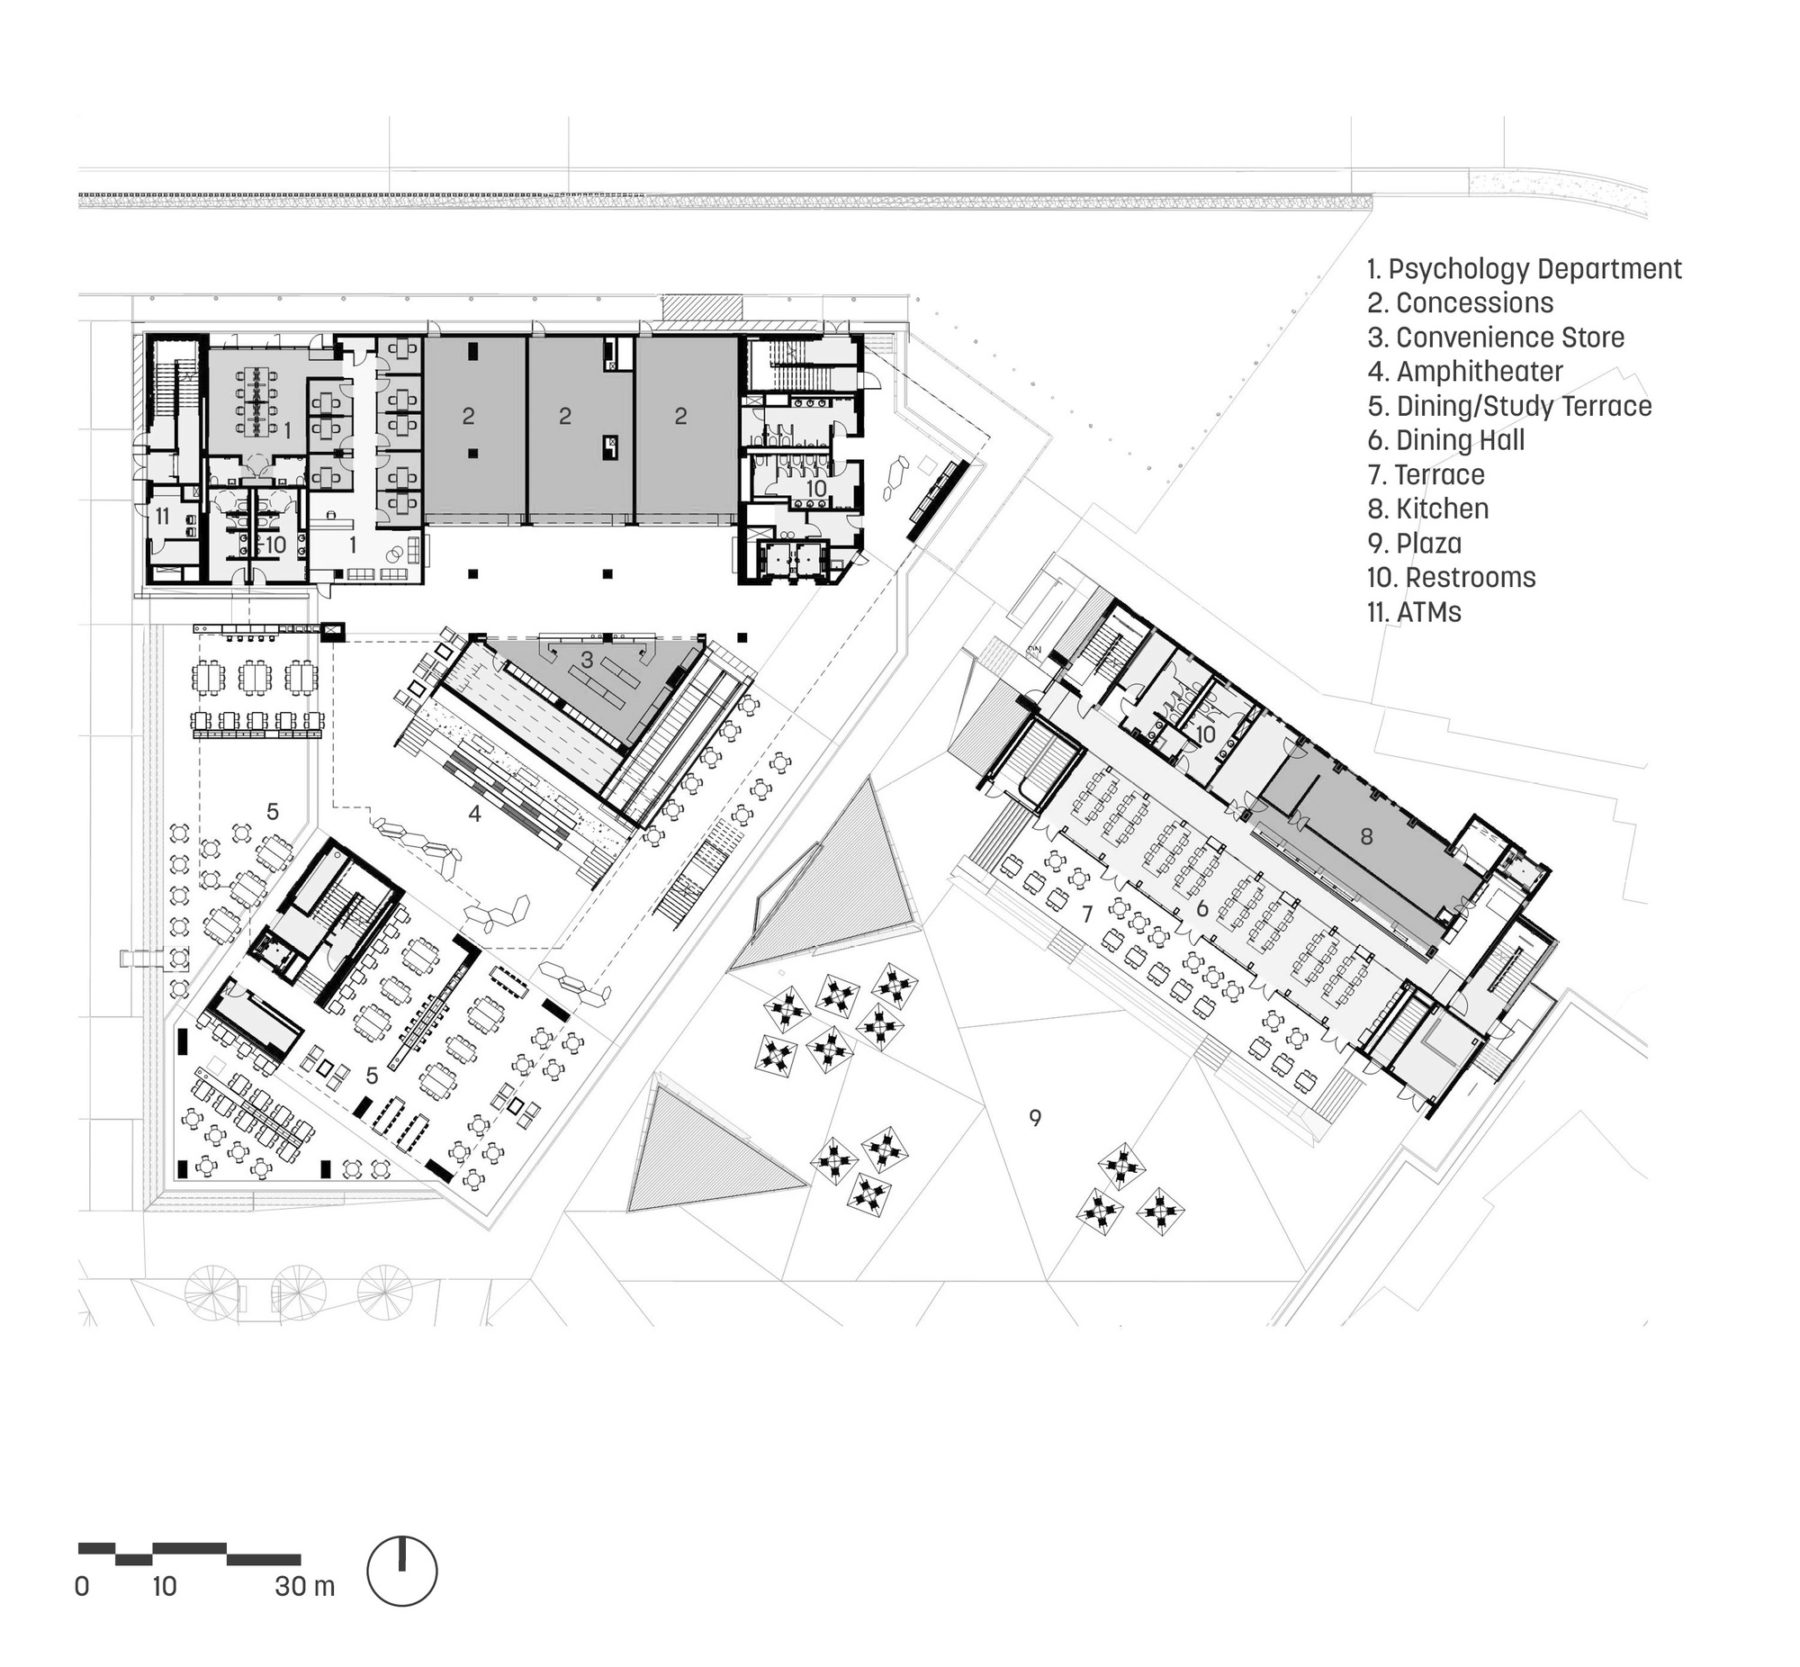 floor plan of building with major program spaces labeled